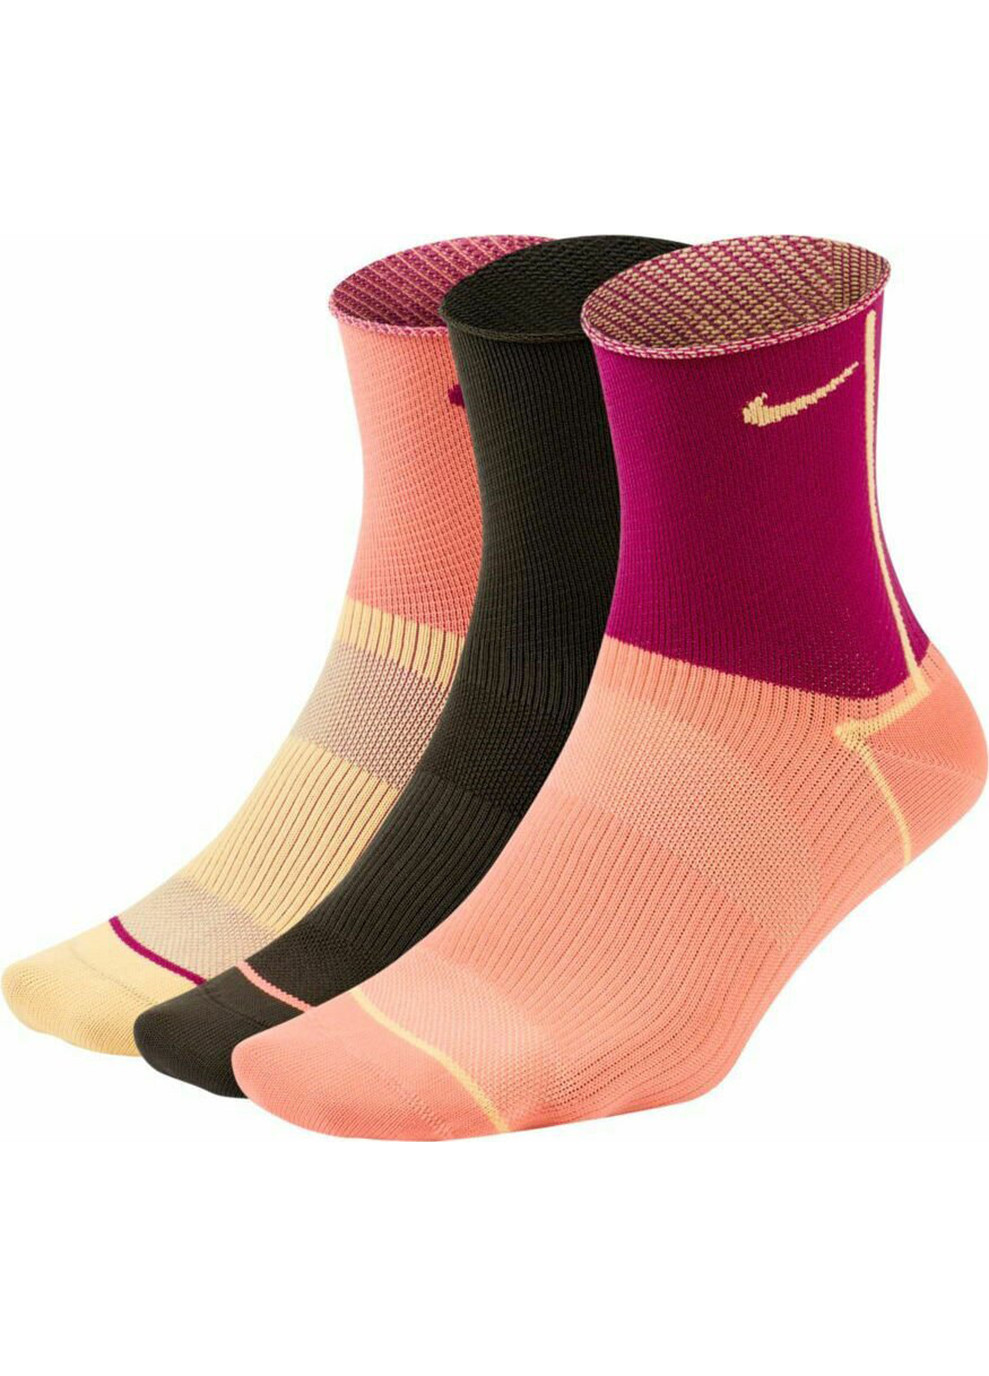 Носки Everyday Plus Lightweight Ankle 3-pack black/pink/yellow Nike (260944019)